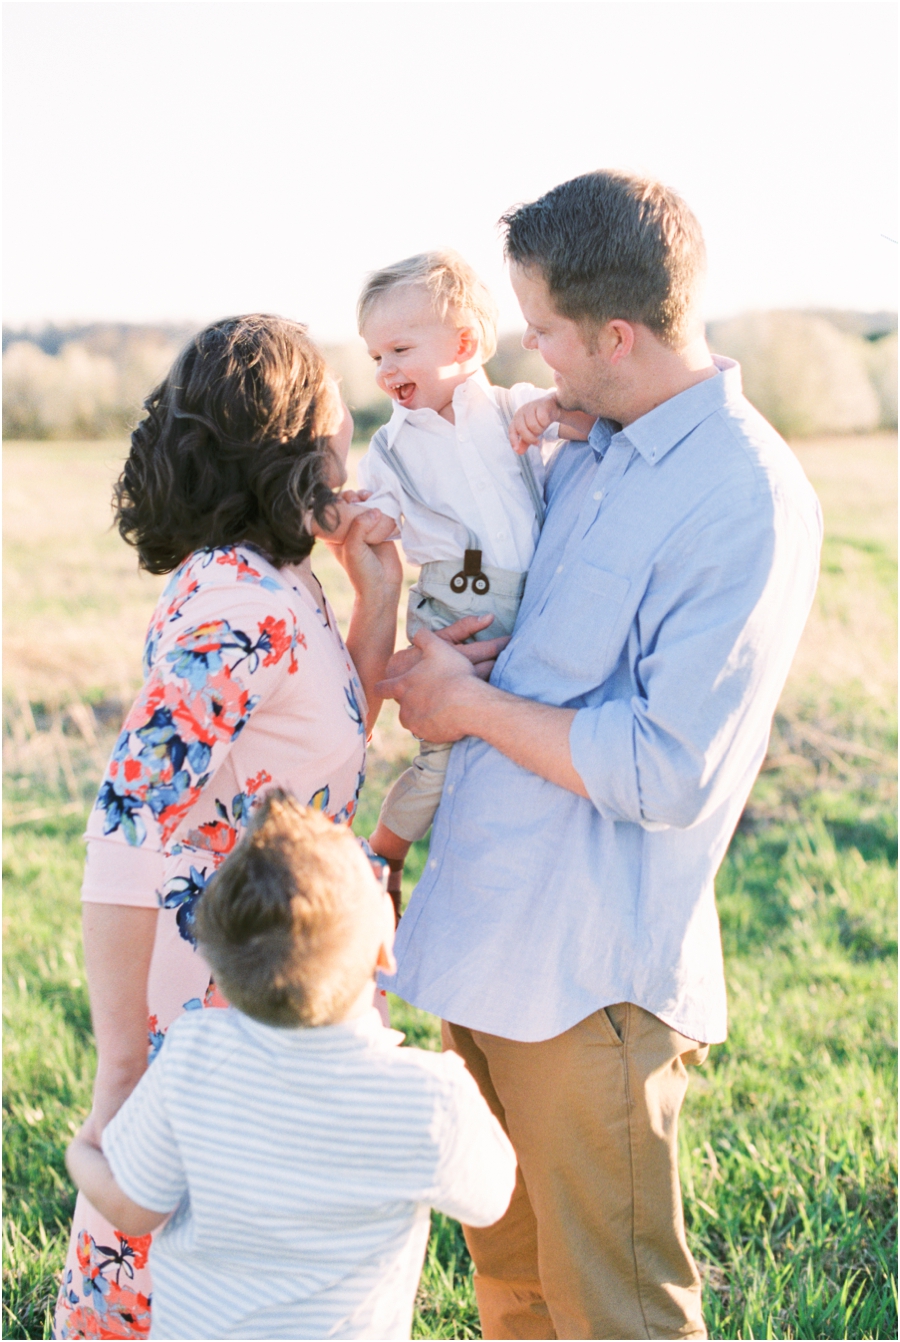 Spring Hershey, Pennsylvania Family Session by Film Photographer Hillary Muelleck